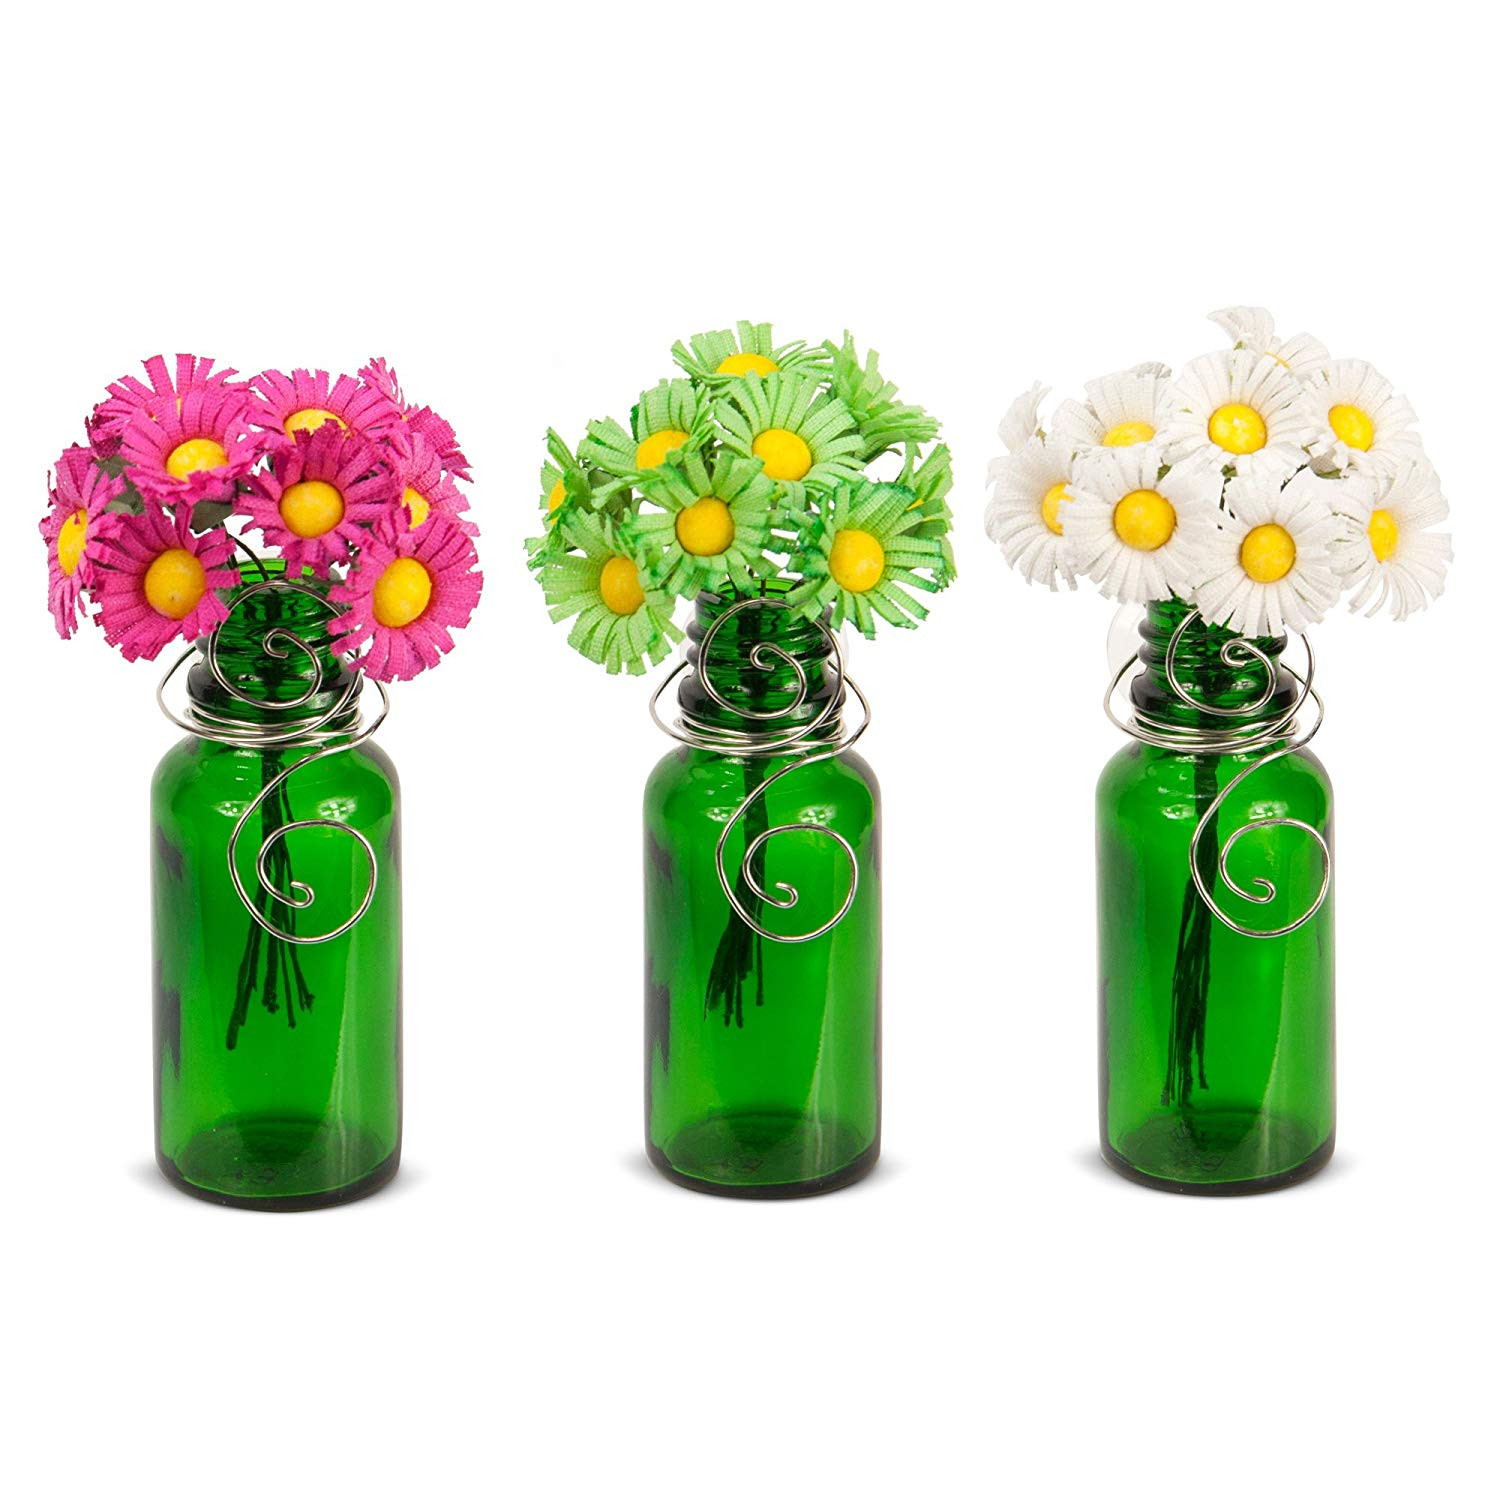 21 Stylish Small Crystal Flower Vase 2024 free download small crystal flower vase of amazon com vazzini mini vase bouquet suction cup bud bottle with amazon com vazzini mini vase bouquet suction cup bud bottle holder with flowers decorative for w